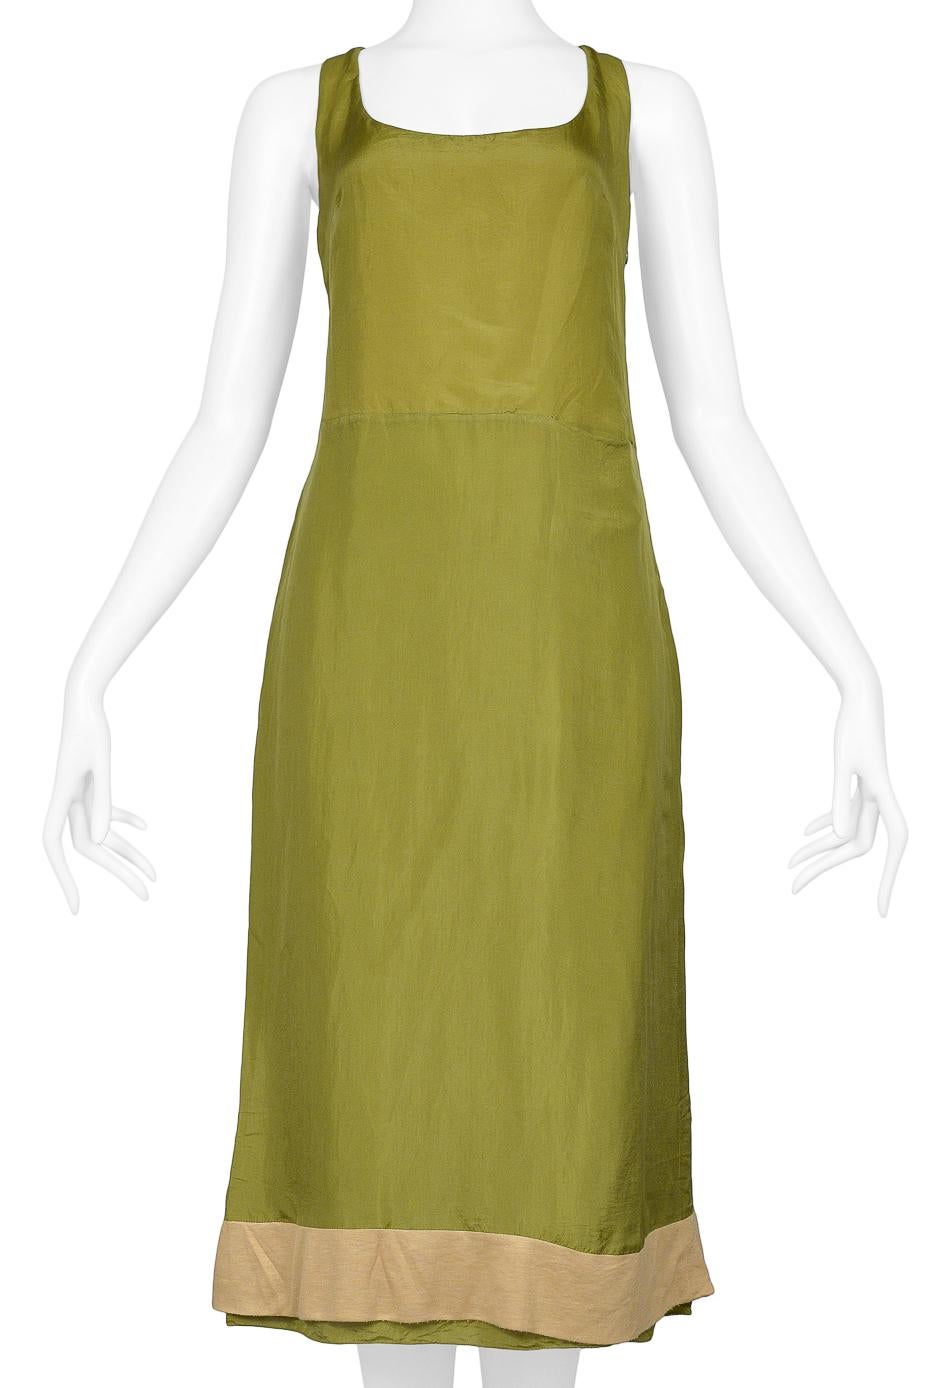 Resurrection Vintage is excited to offer a vintage Miu Miu olive green slip dress featuring a scoop neck, slightly high waistline, and contrasting nude tone band above the hem.  

Miu Miu
Size 42
Feels Like Silk
Very Good Vintage